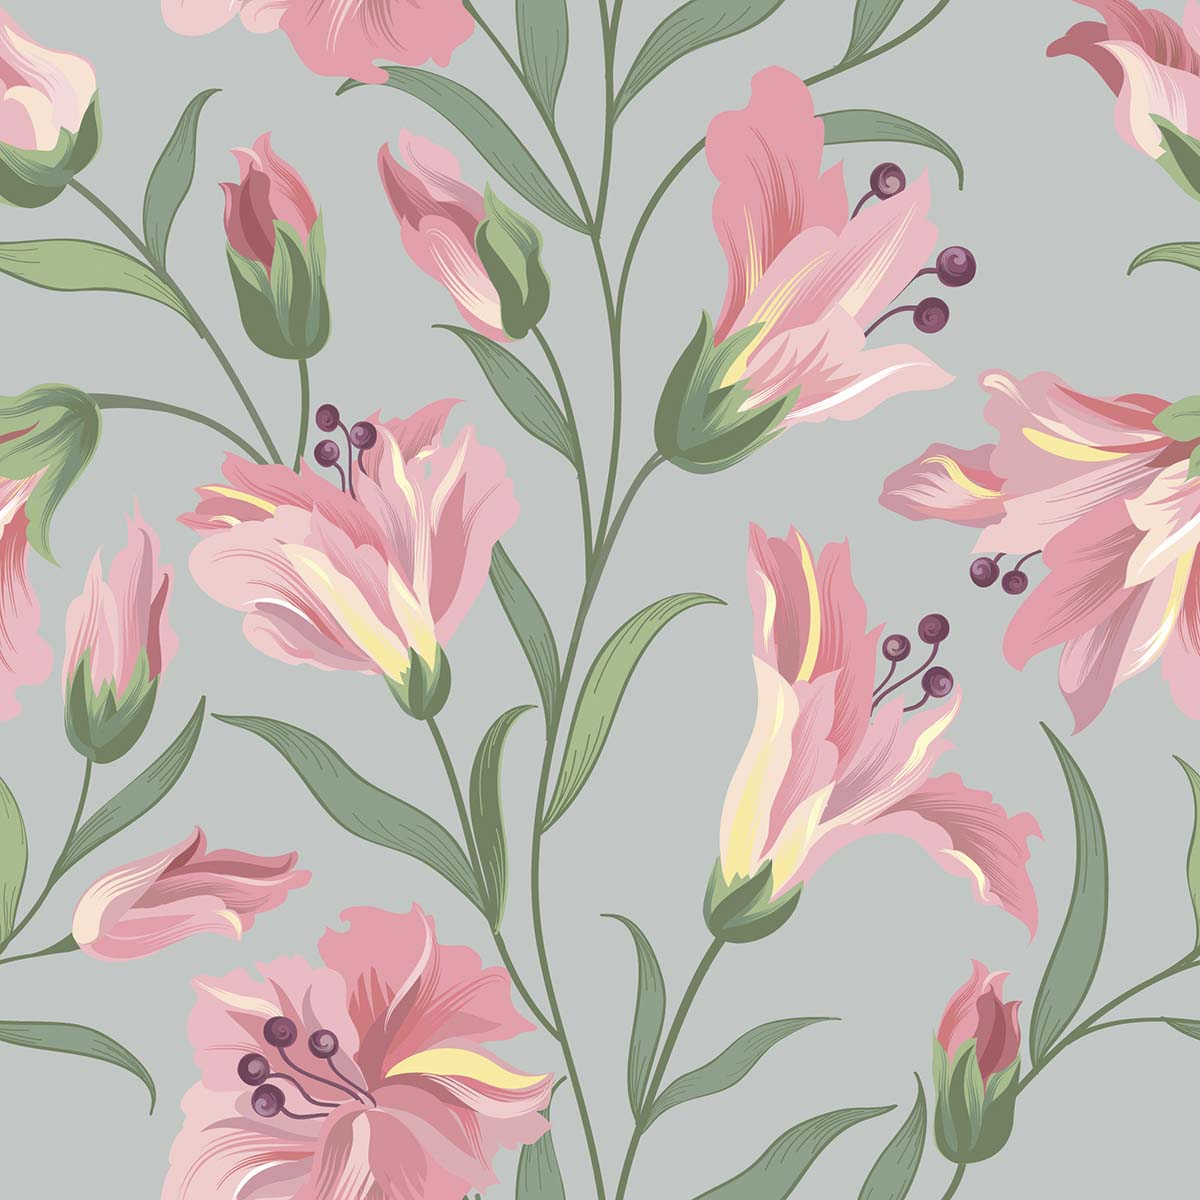 A floral pattern with pink flowers